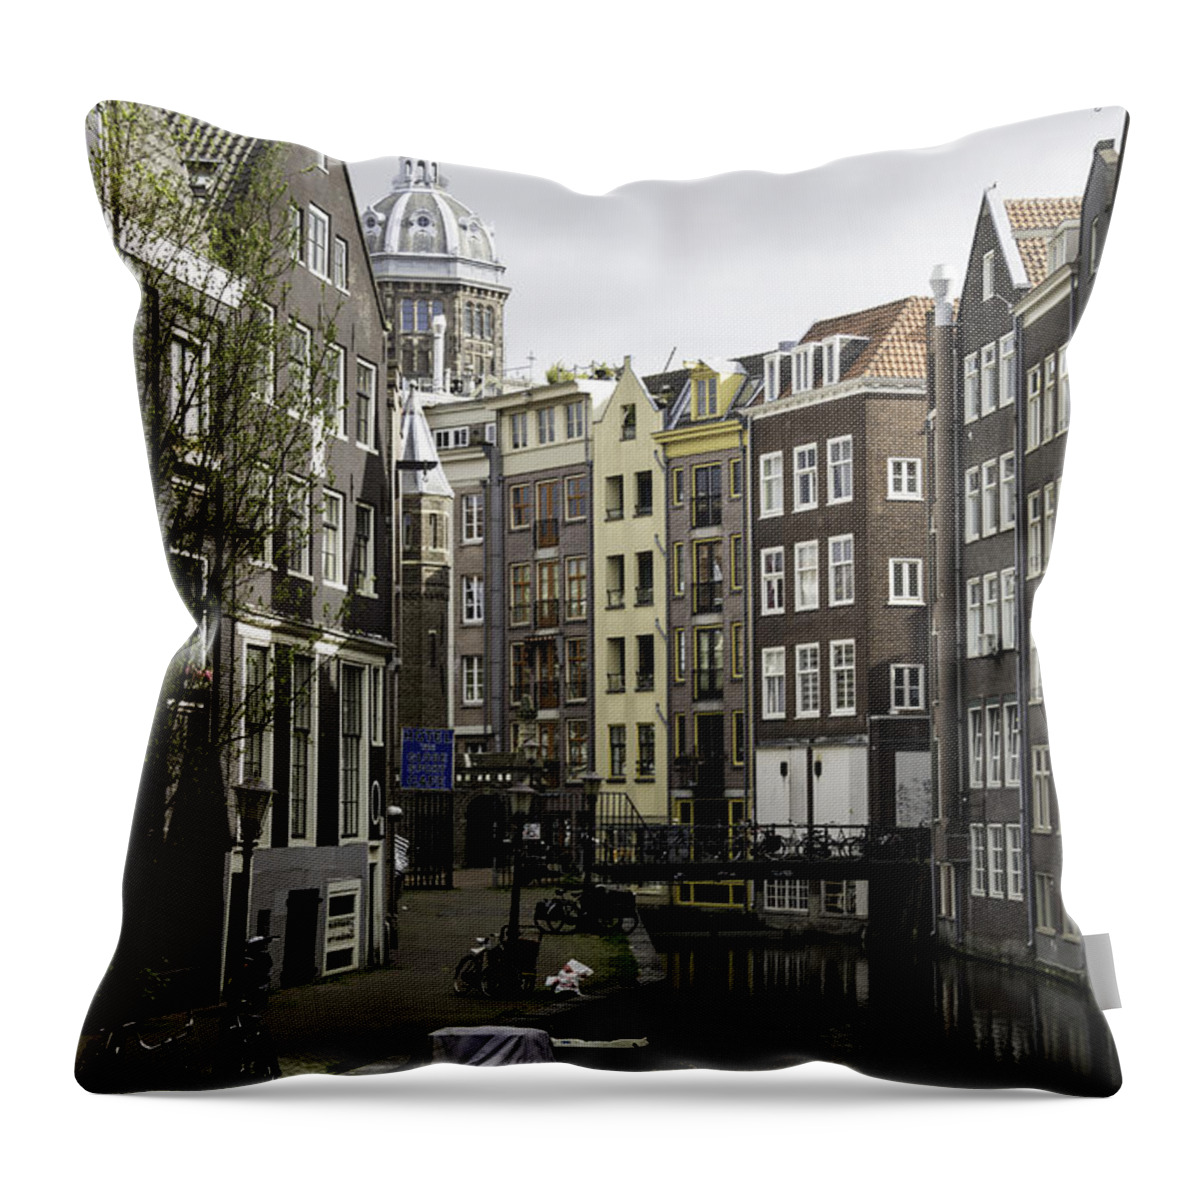 2014 Throw Pillow featuring the photograph Boats in Canal Amsterdam by Teresa Mucha